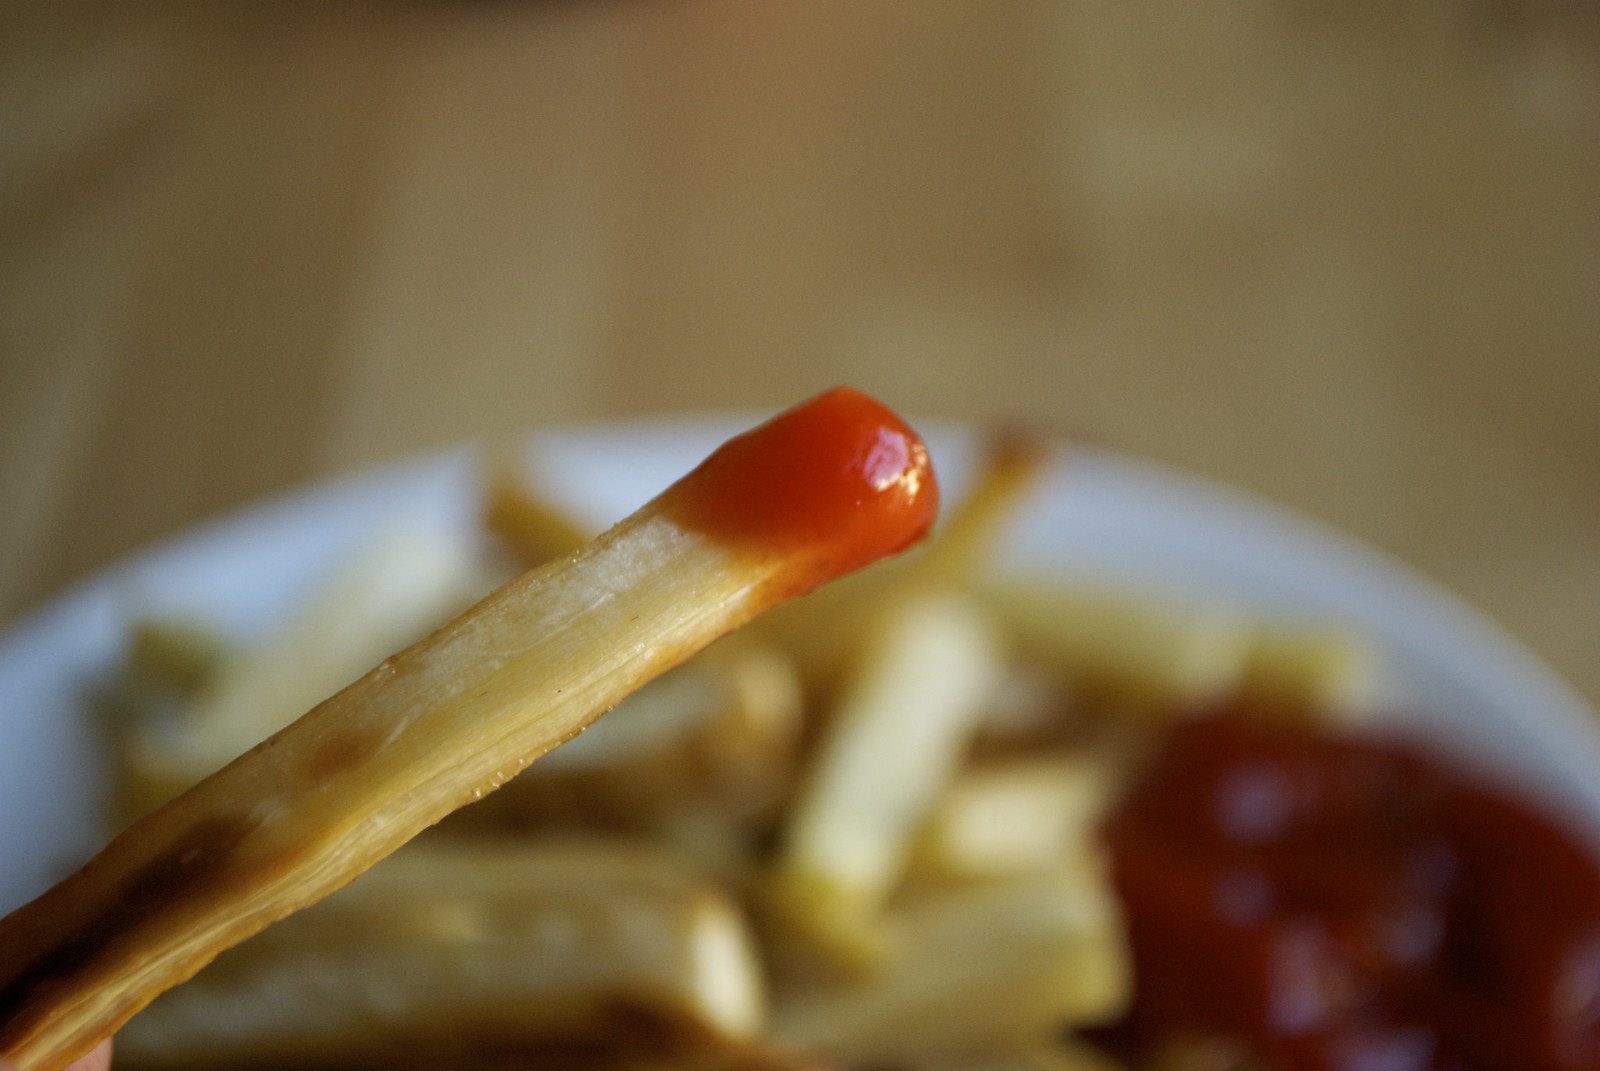 parsnip fries with sriracha-spiked ketchup